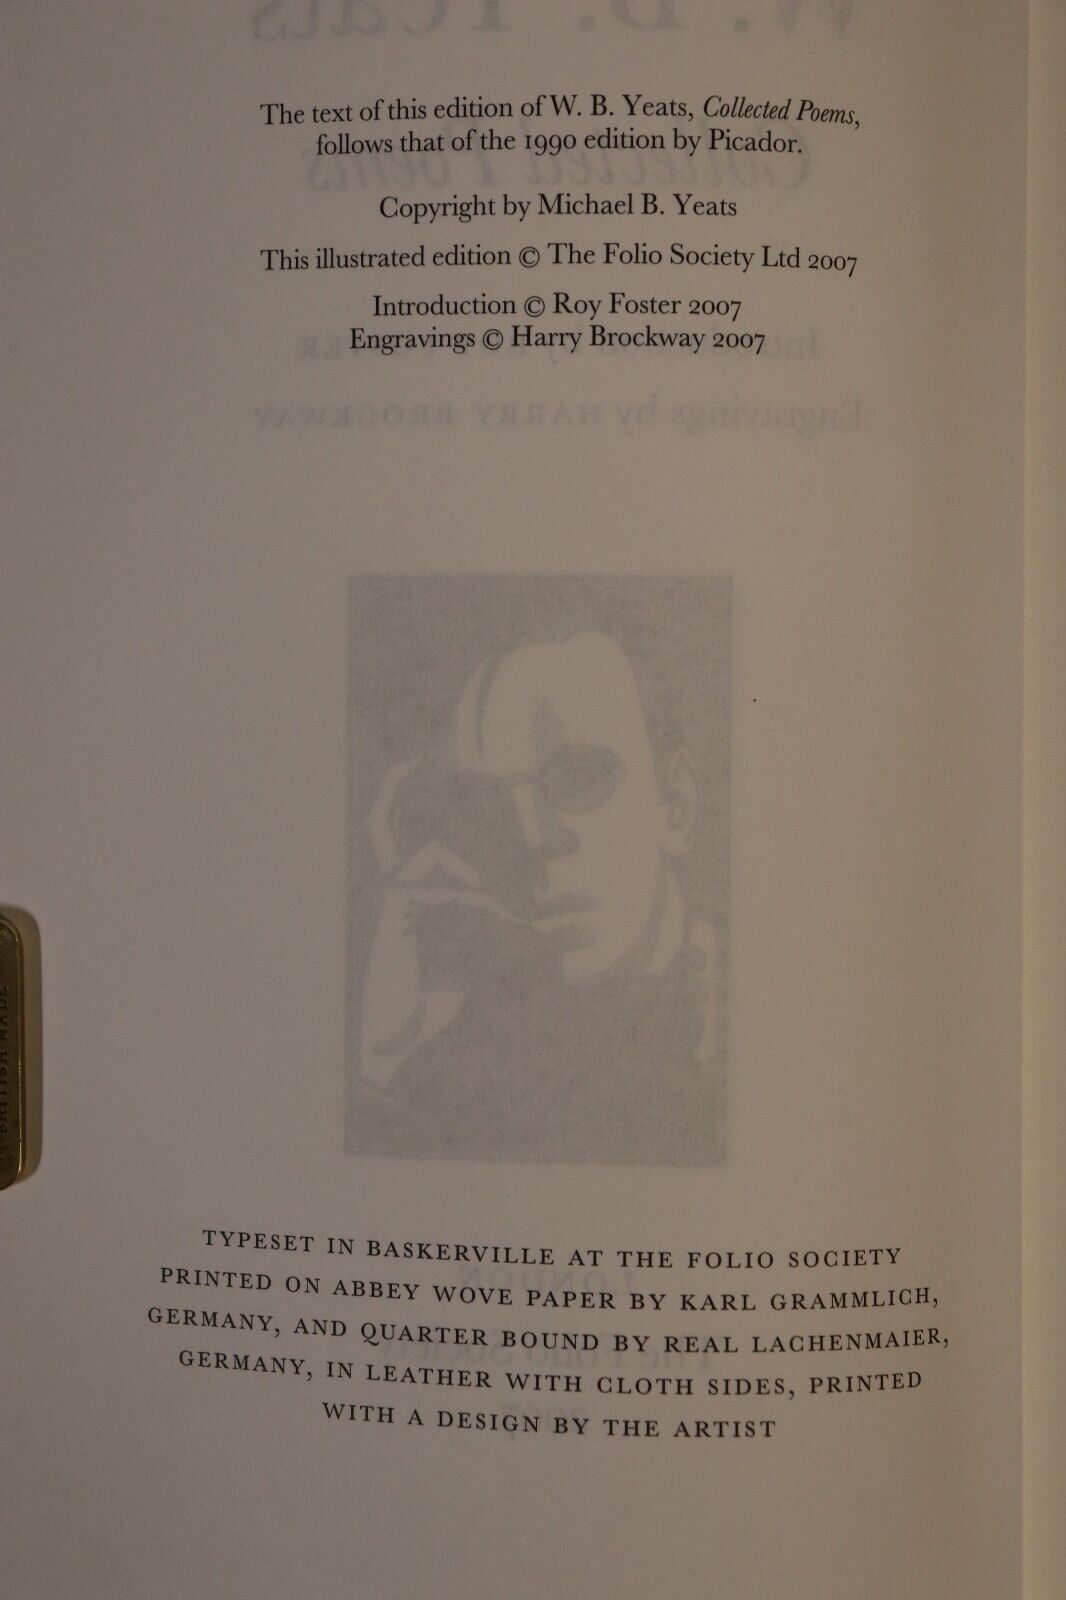 W.B. Yeats: Collected Poems - 2007 - Folio Society - Poetry Book